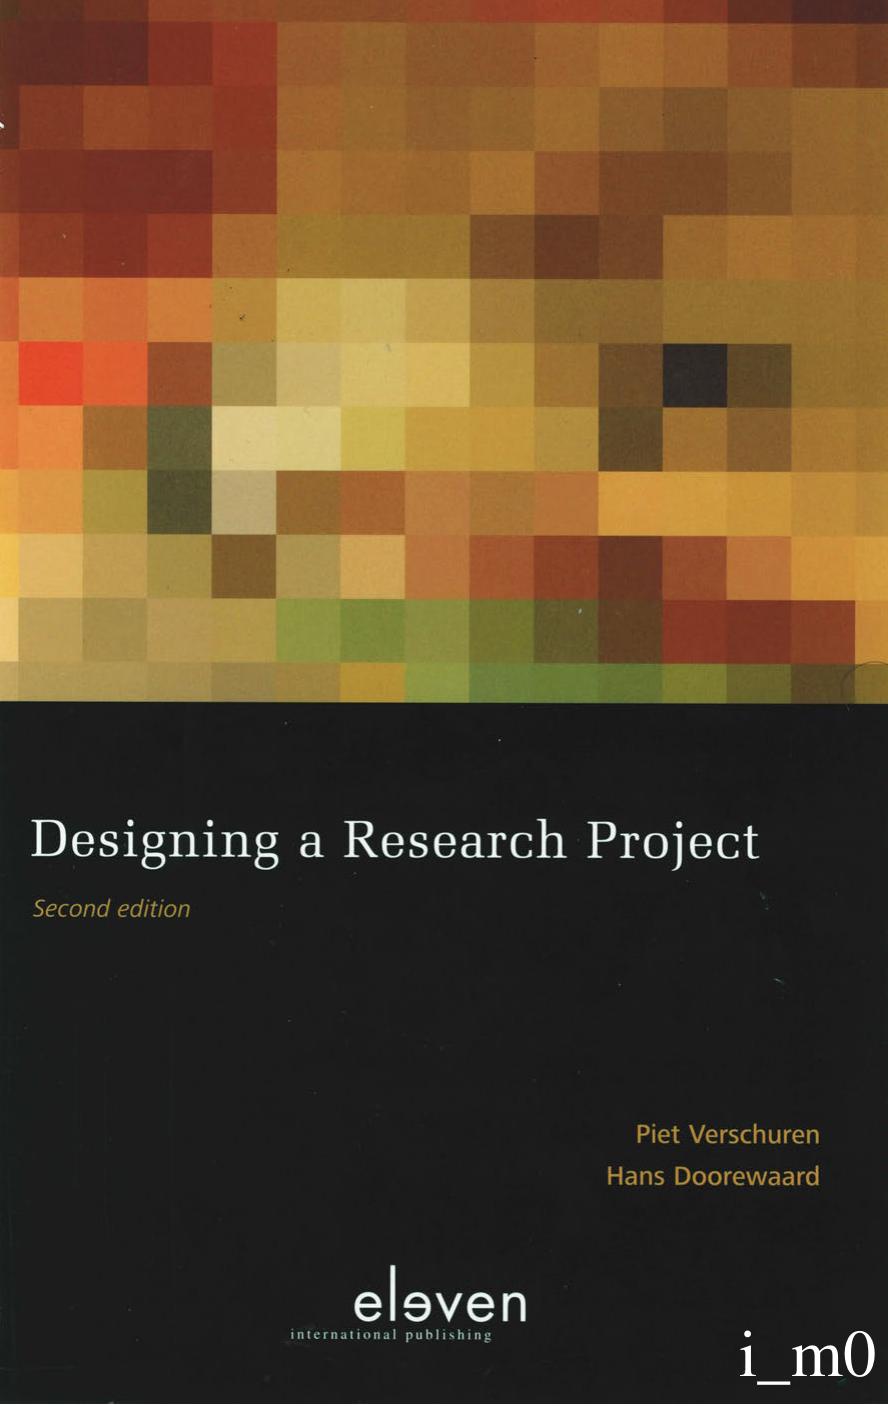 Designing a Research Project